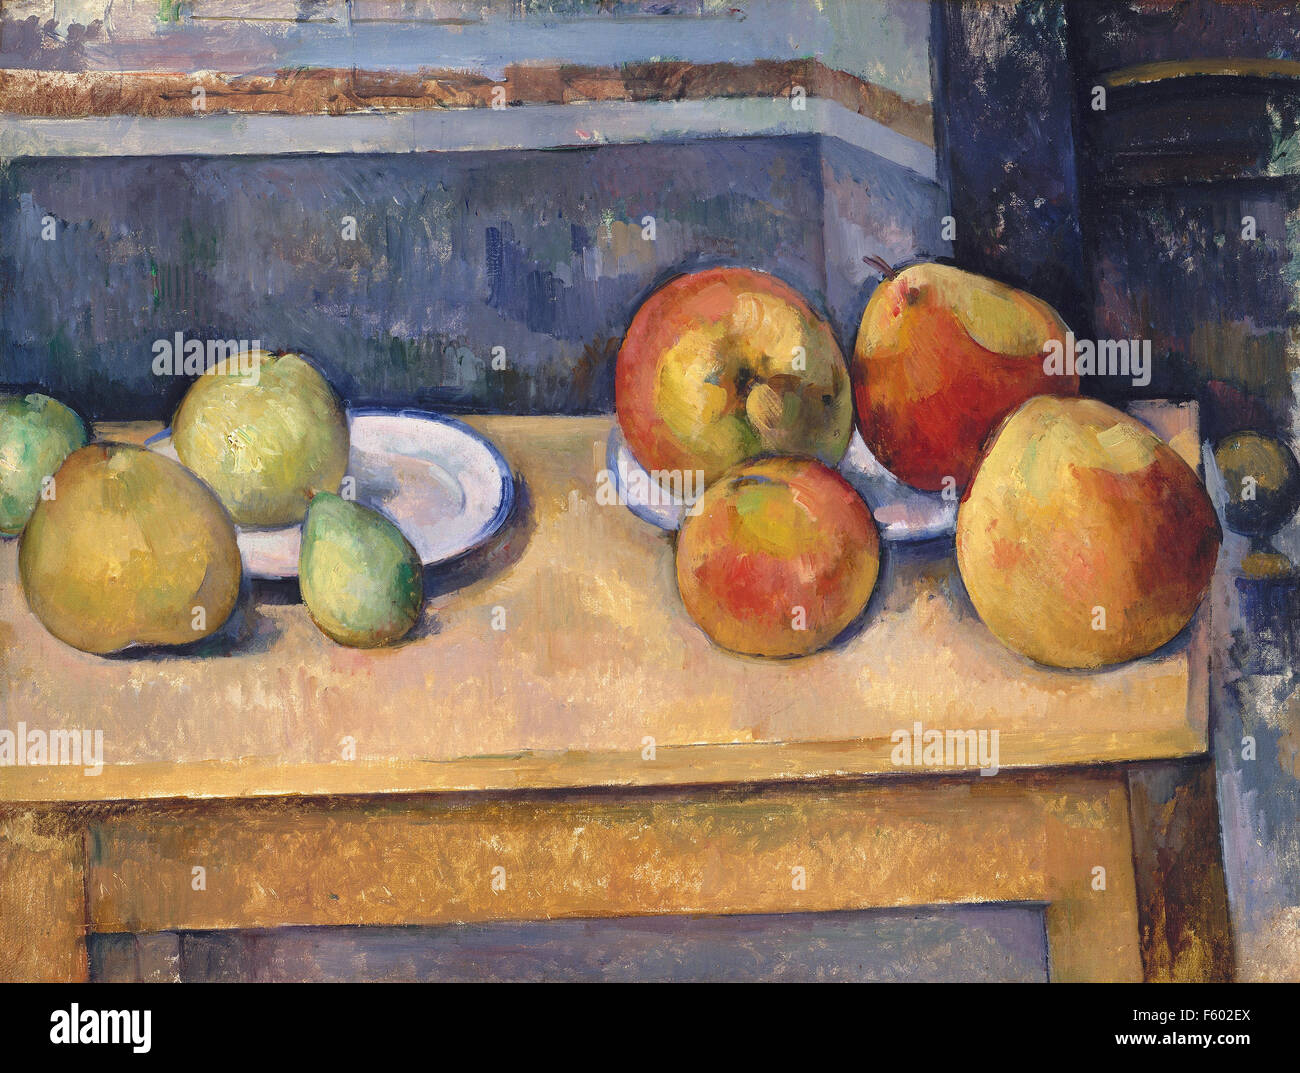 Paul Cézanne - Still Life with Apples and Pears Stock Photo